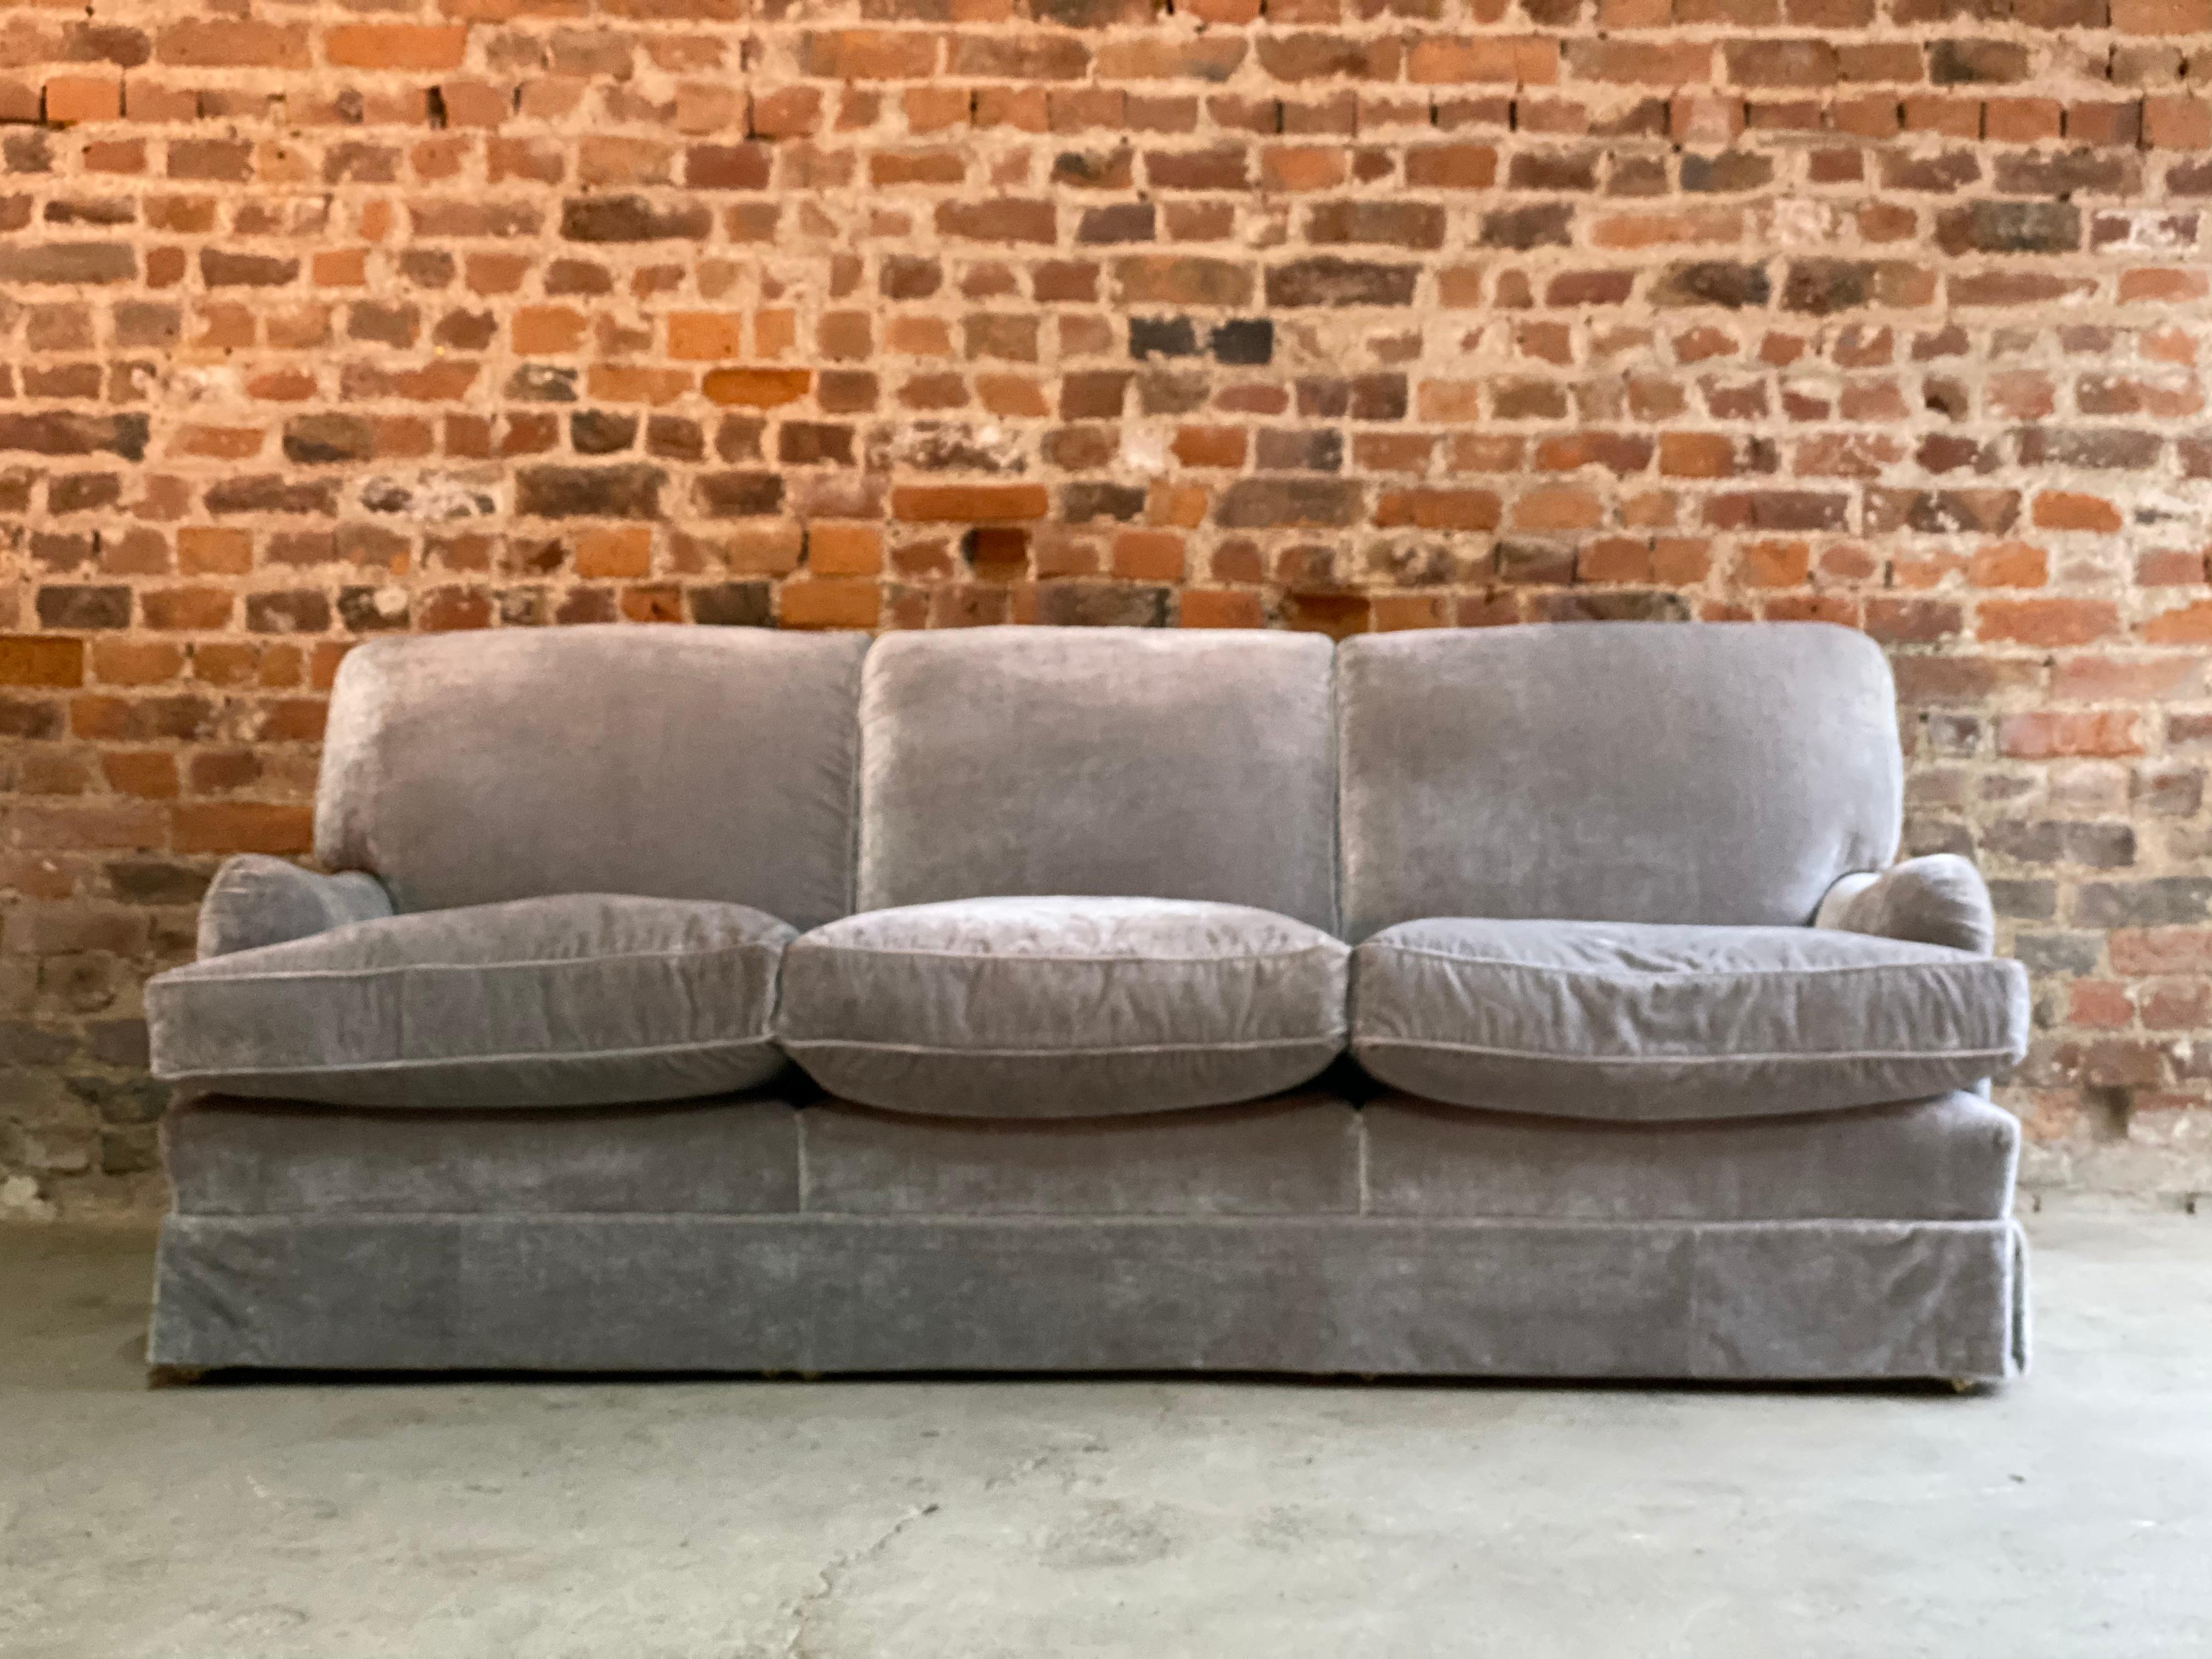 Howard & Sons Bridgewater sofa deep seated loose cushion bespoke 2014 number 1

Howard & Sons loose cushion deep seated Bridgewater Sofa labelled to underside, the sofa is upholstered in the finest grey velvet upholstery, H&S Serial Number S/12511